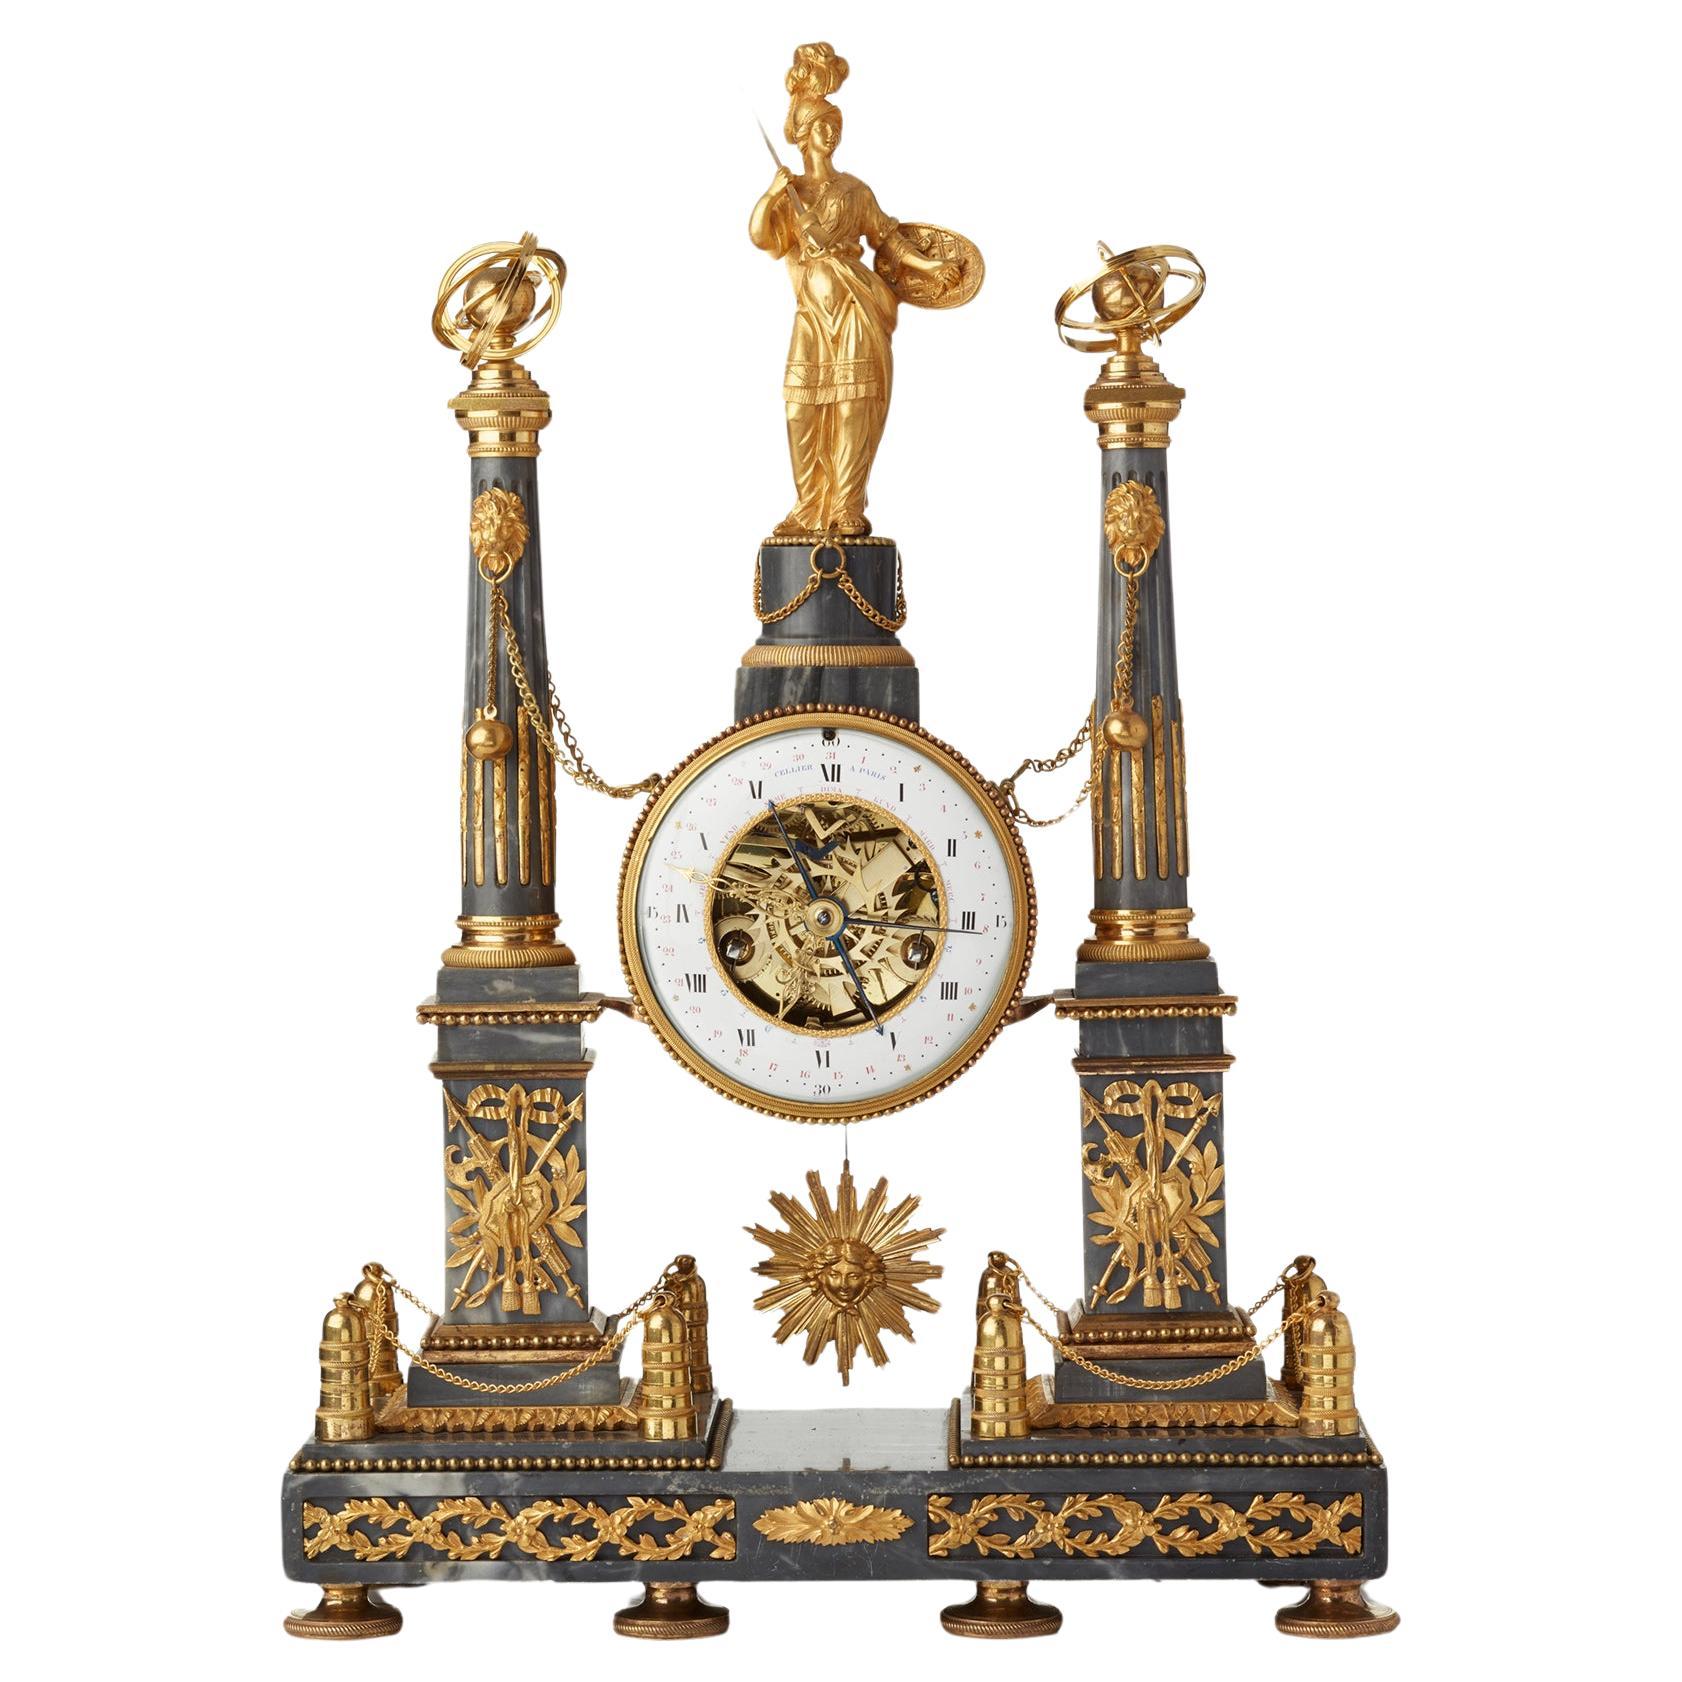 Louis XVI grey marble mantel clock by Cellier 